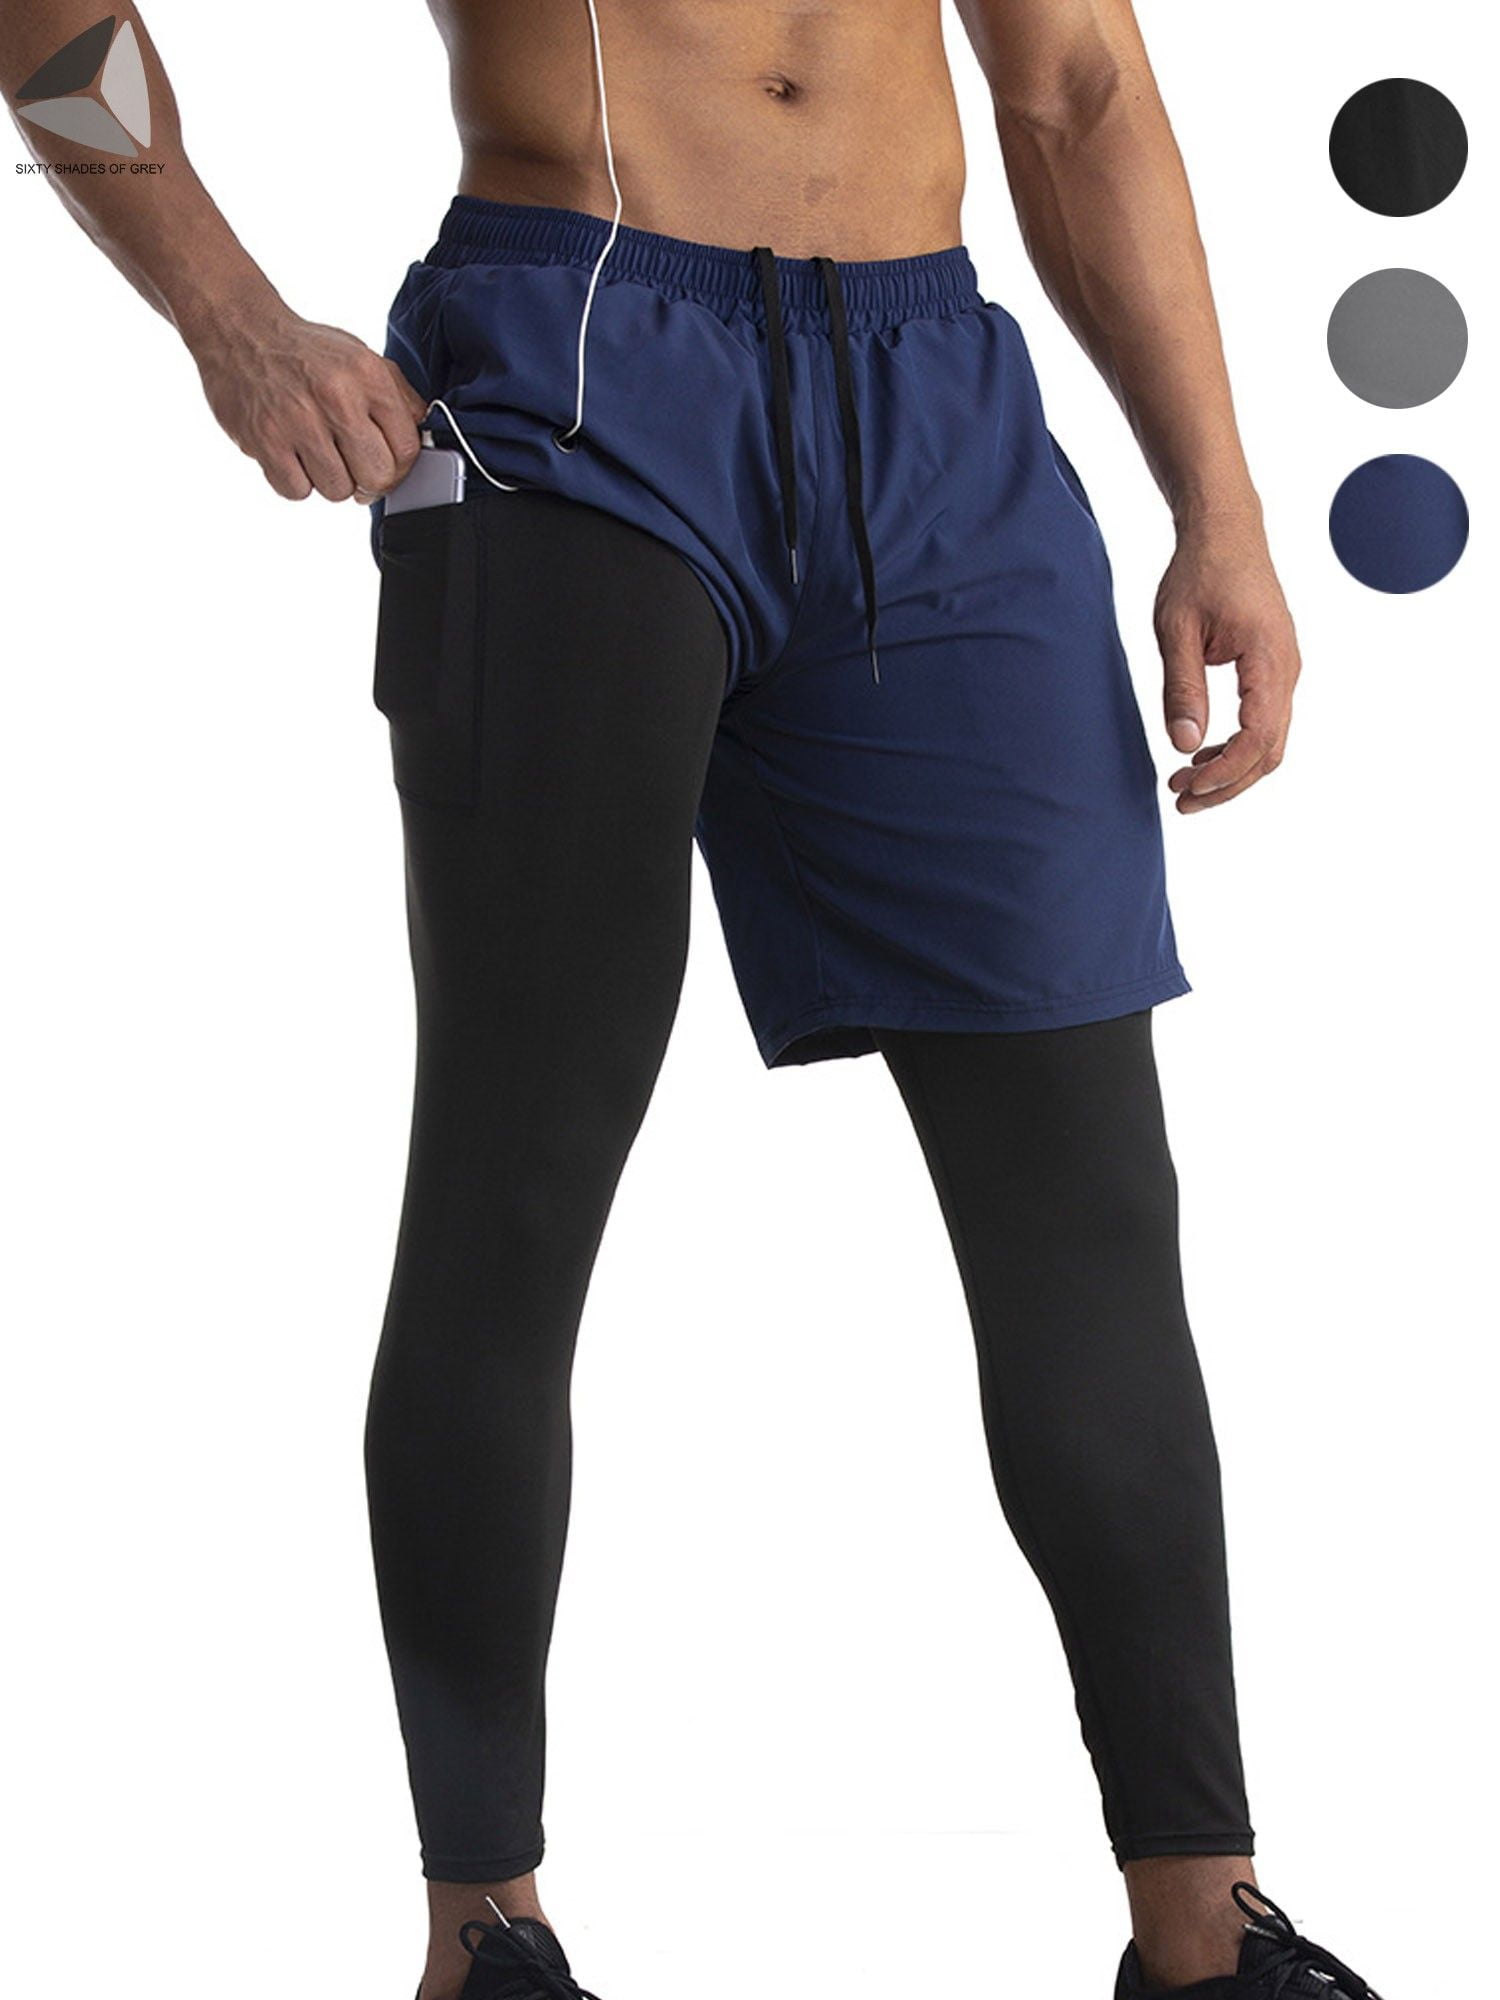 PULLIMORE Men's 2 in 1 Running Compression Short and Sweatpants Breathable  Athletic Workout Legging with Inner Pocket (M, Navy Blue) 